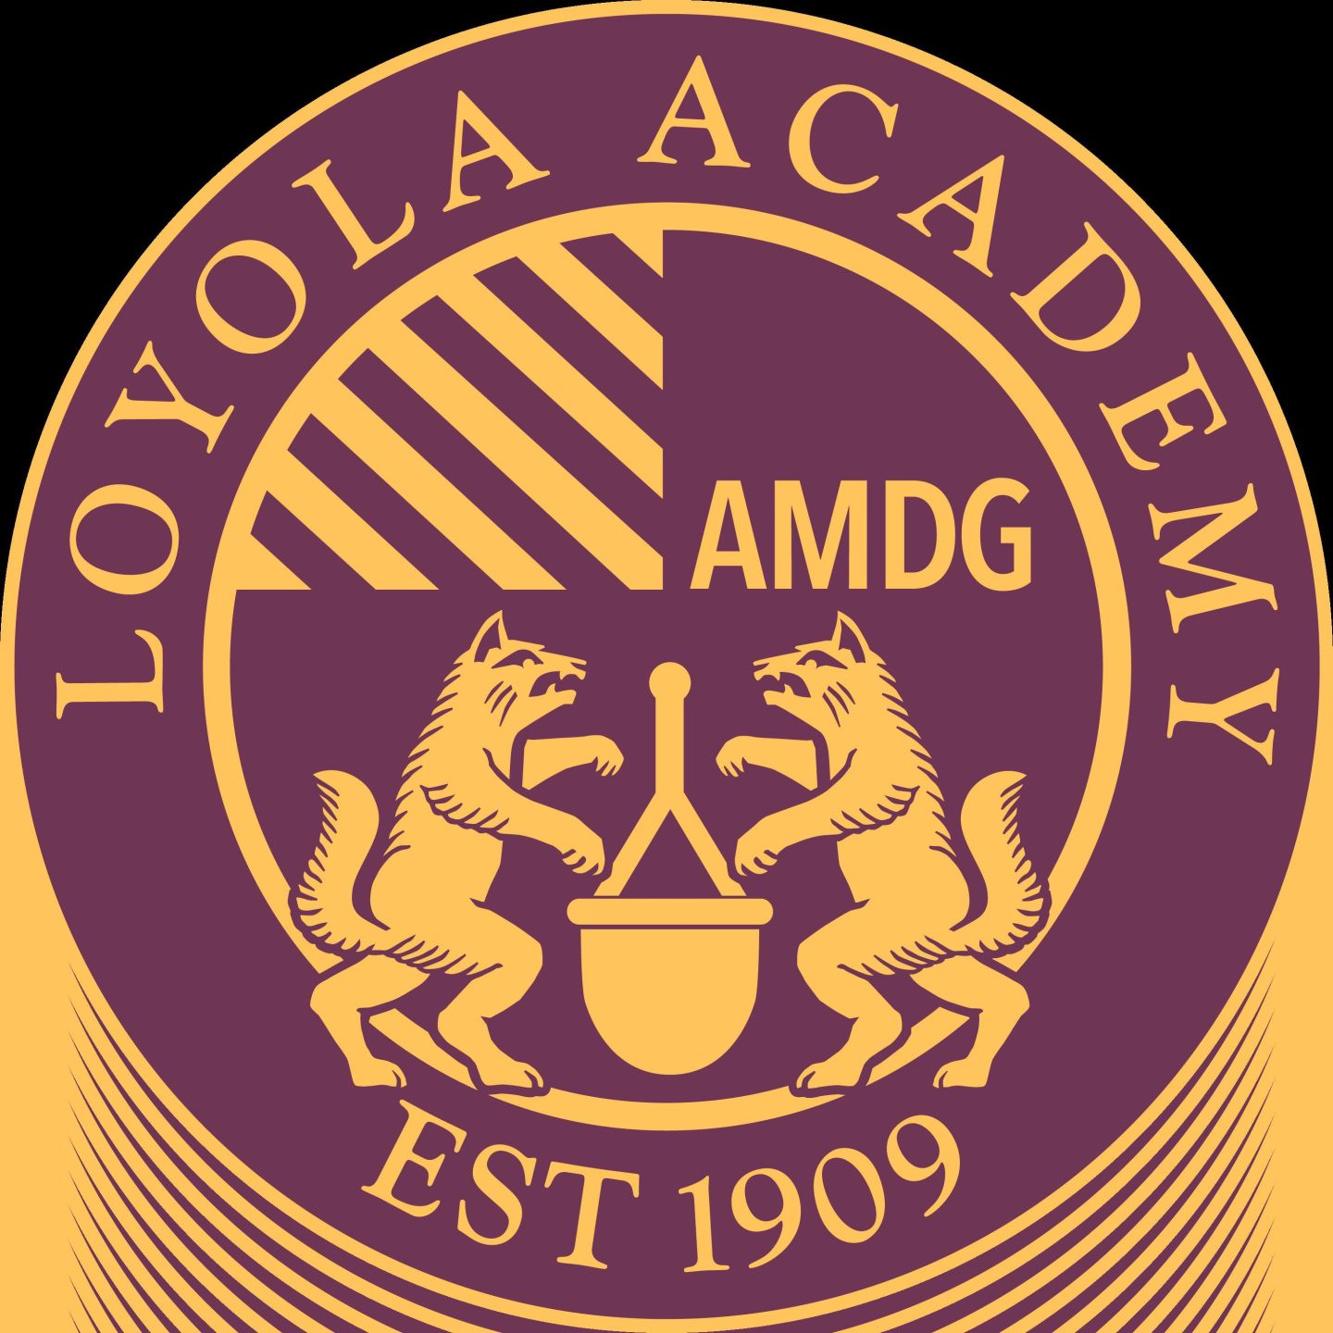 What's in a Name? Loyola Academy Ramblers News